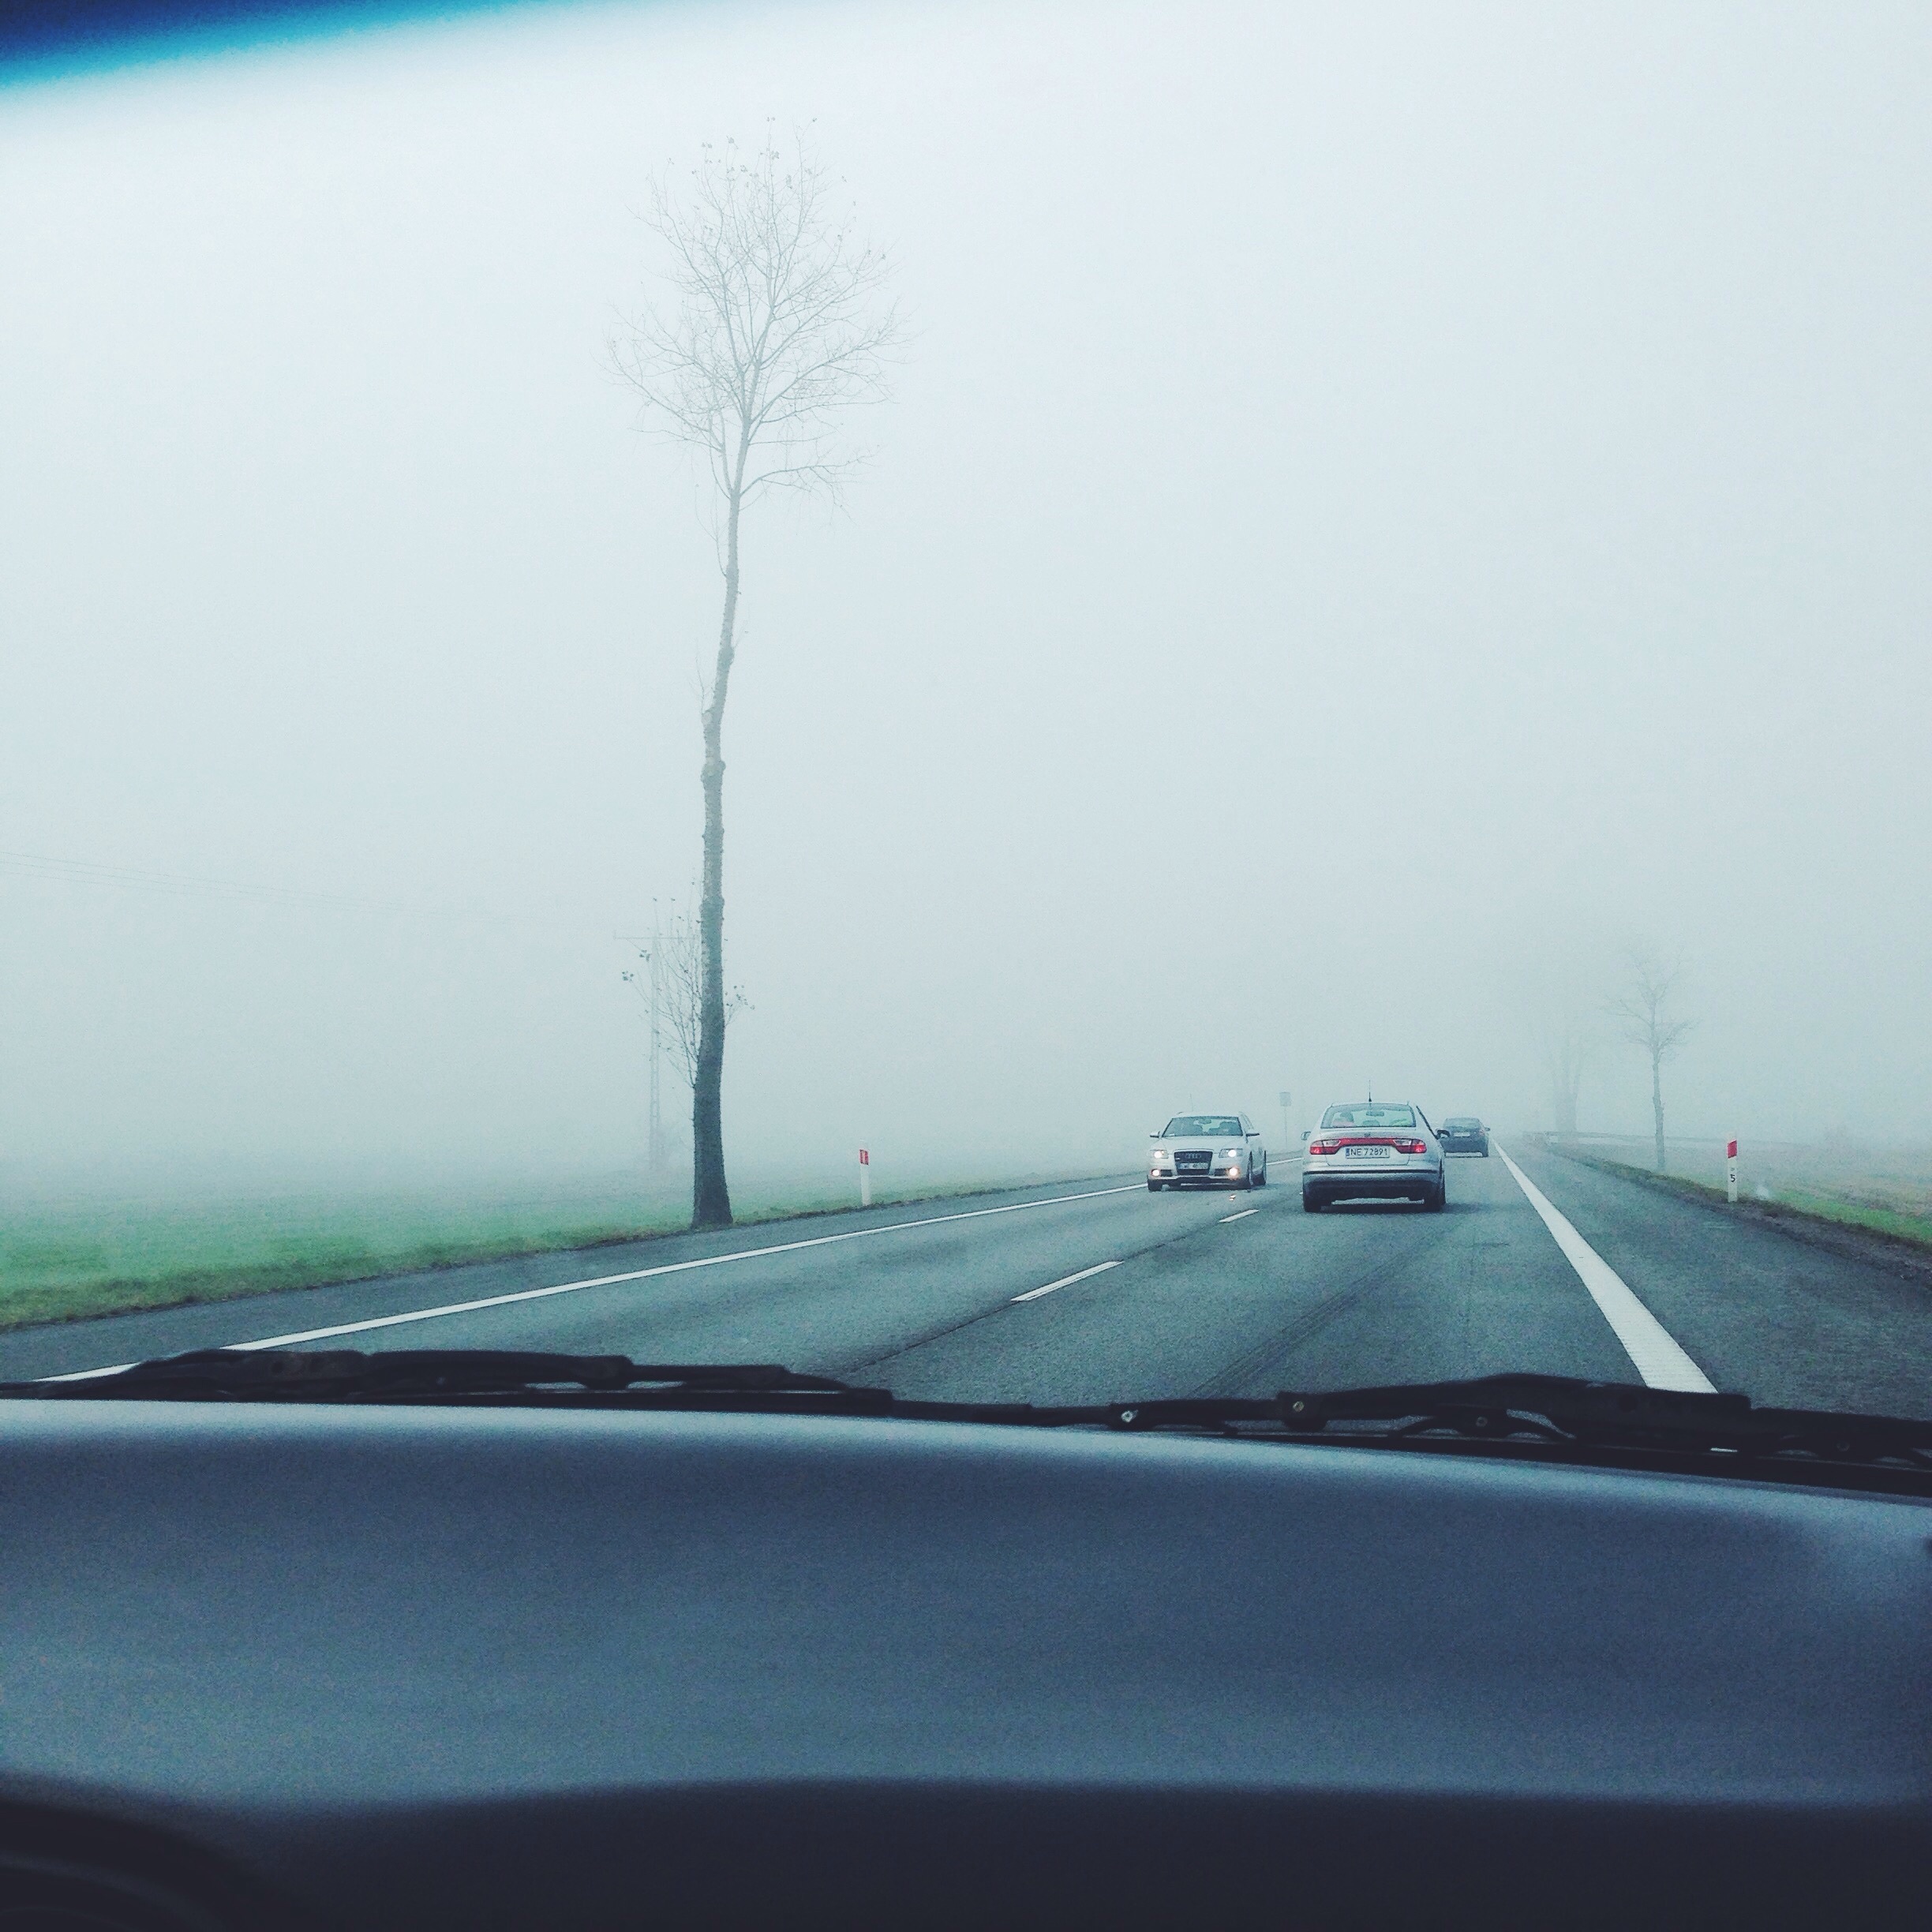 Unclear, City, Fog, Highway, Interior, HQ Photo